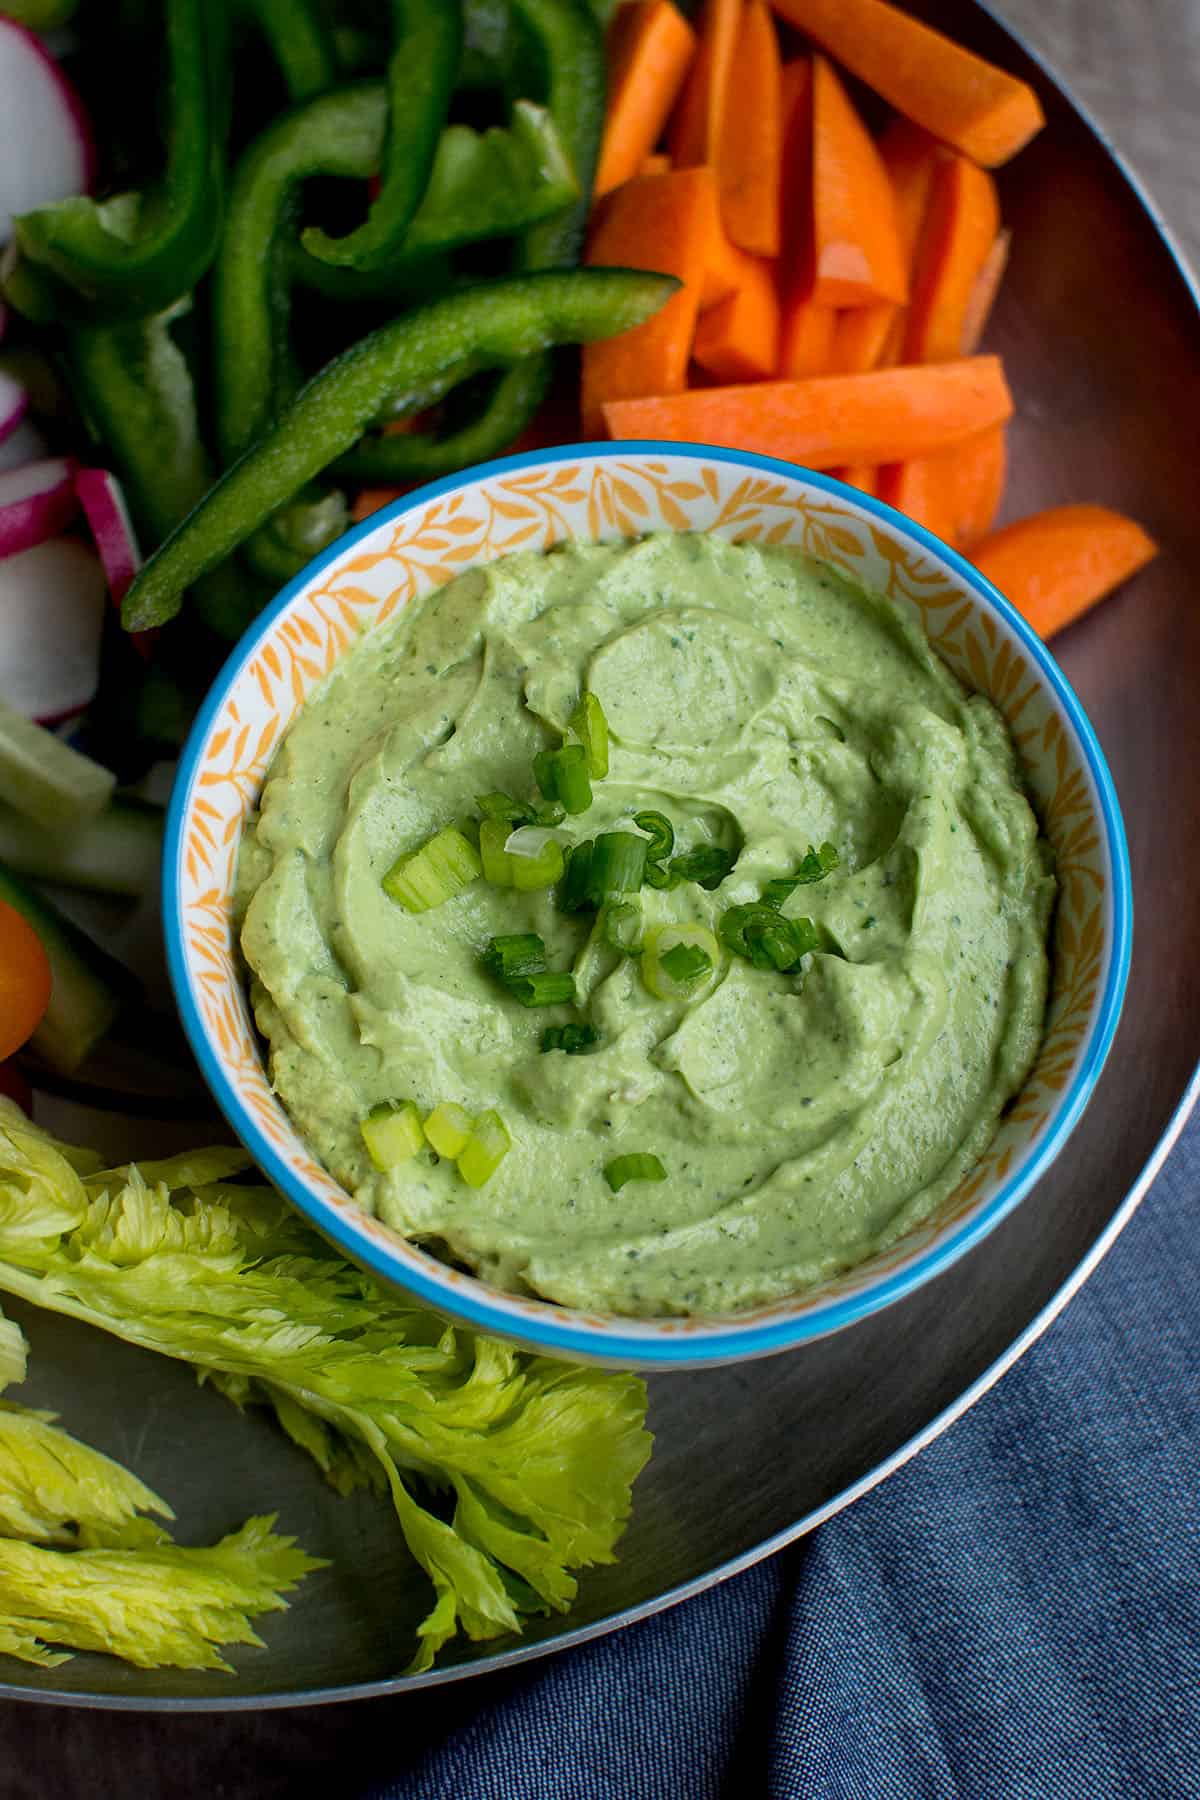 Pewter tray with a white bowl of avocado green goddess dip.